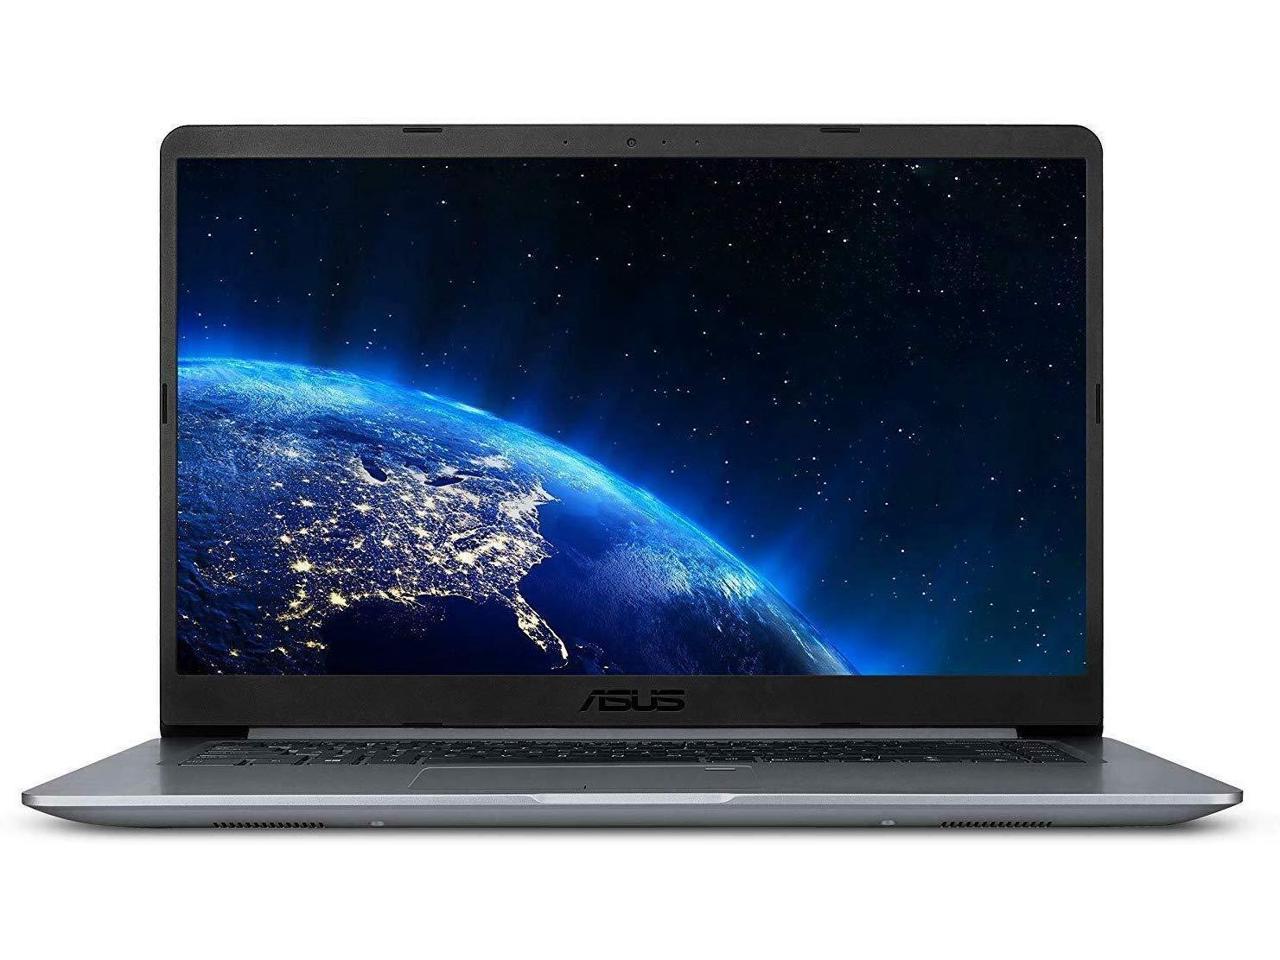 Newest Asus VivoBook Thin & Lightweight Laptop (16G DDR4/512G SSD+1TB HDD)|15.6" Full HD(1920x1080) WideView display| AMD Quad Core A12-9720P Processor| Wi-Fi |Fingerprint Reader|Windows 10 in S Mode